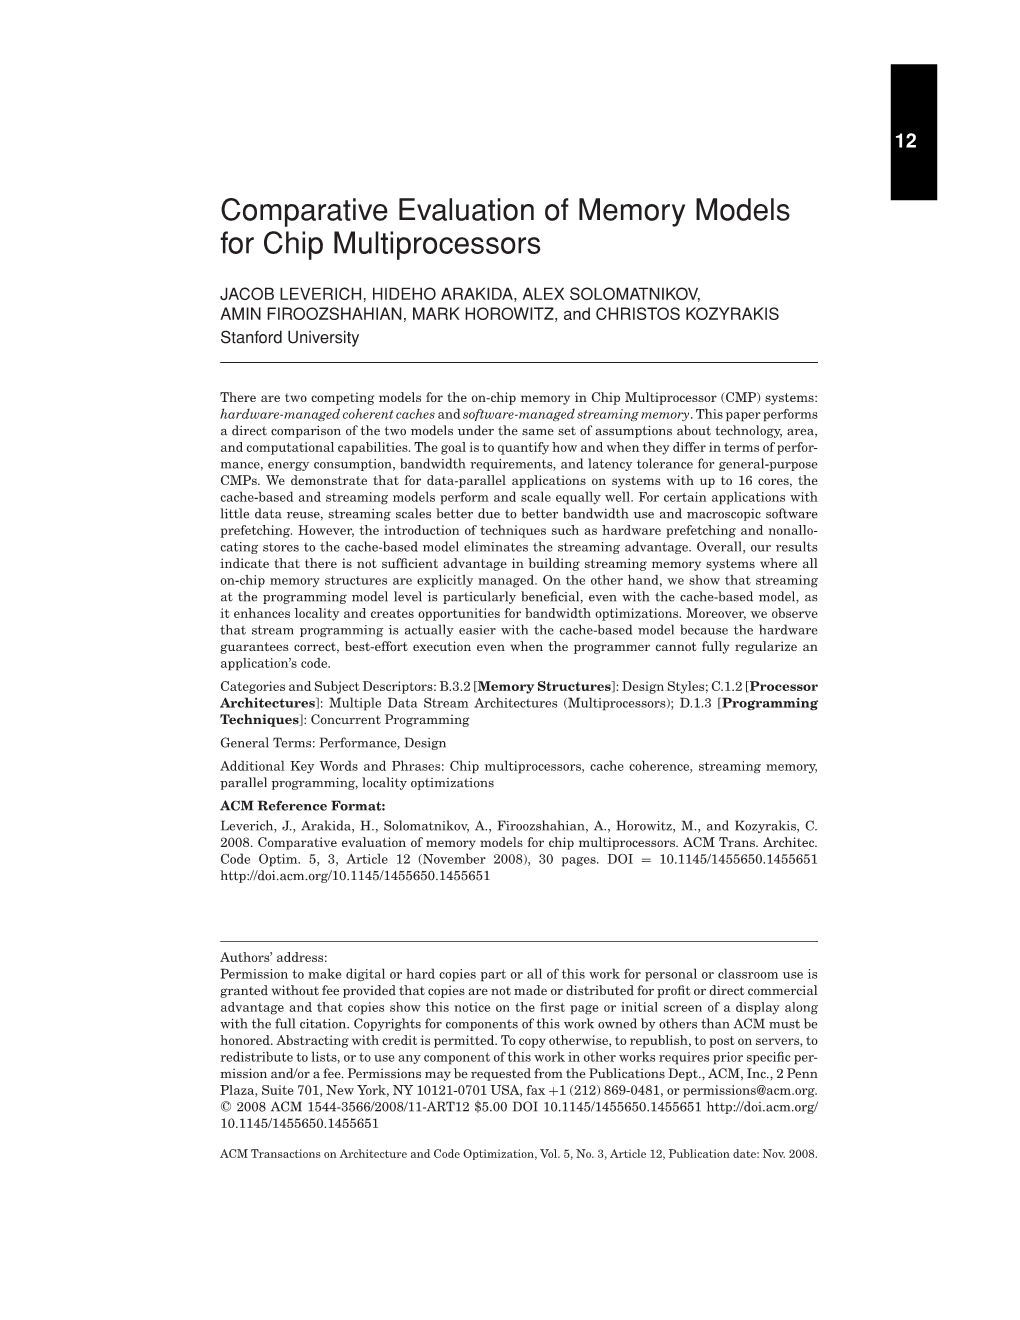 Comparative Evaluation of Memory Models for Chip Multiprocessors